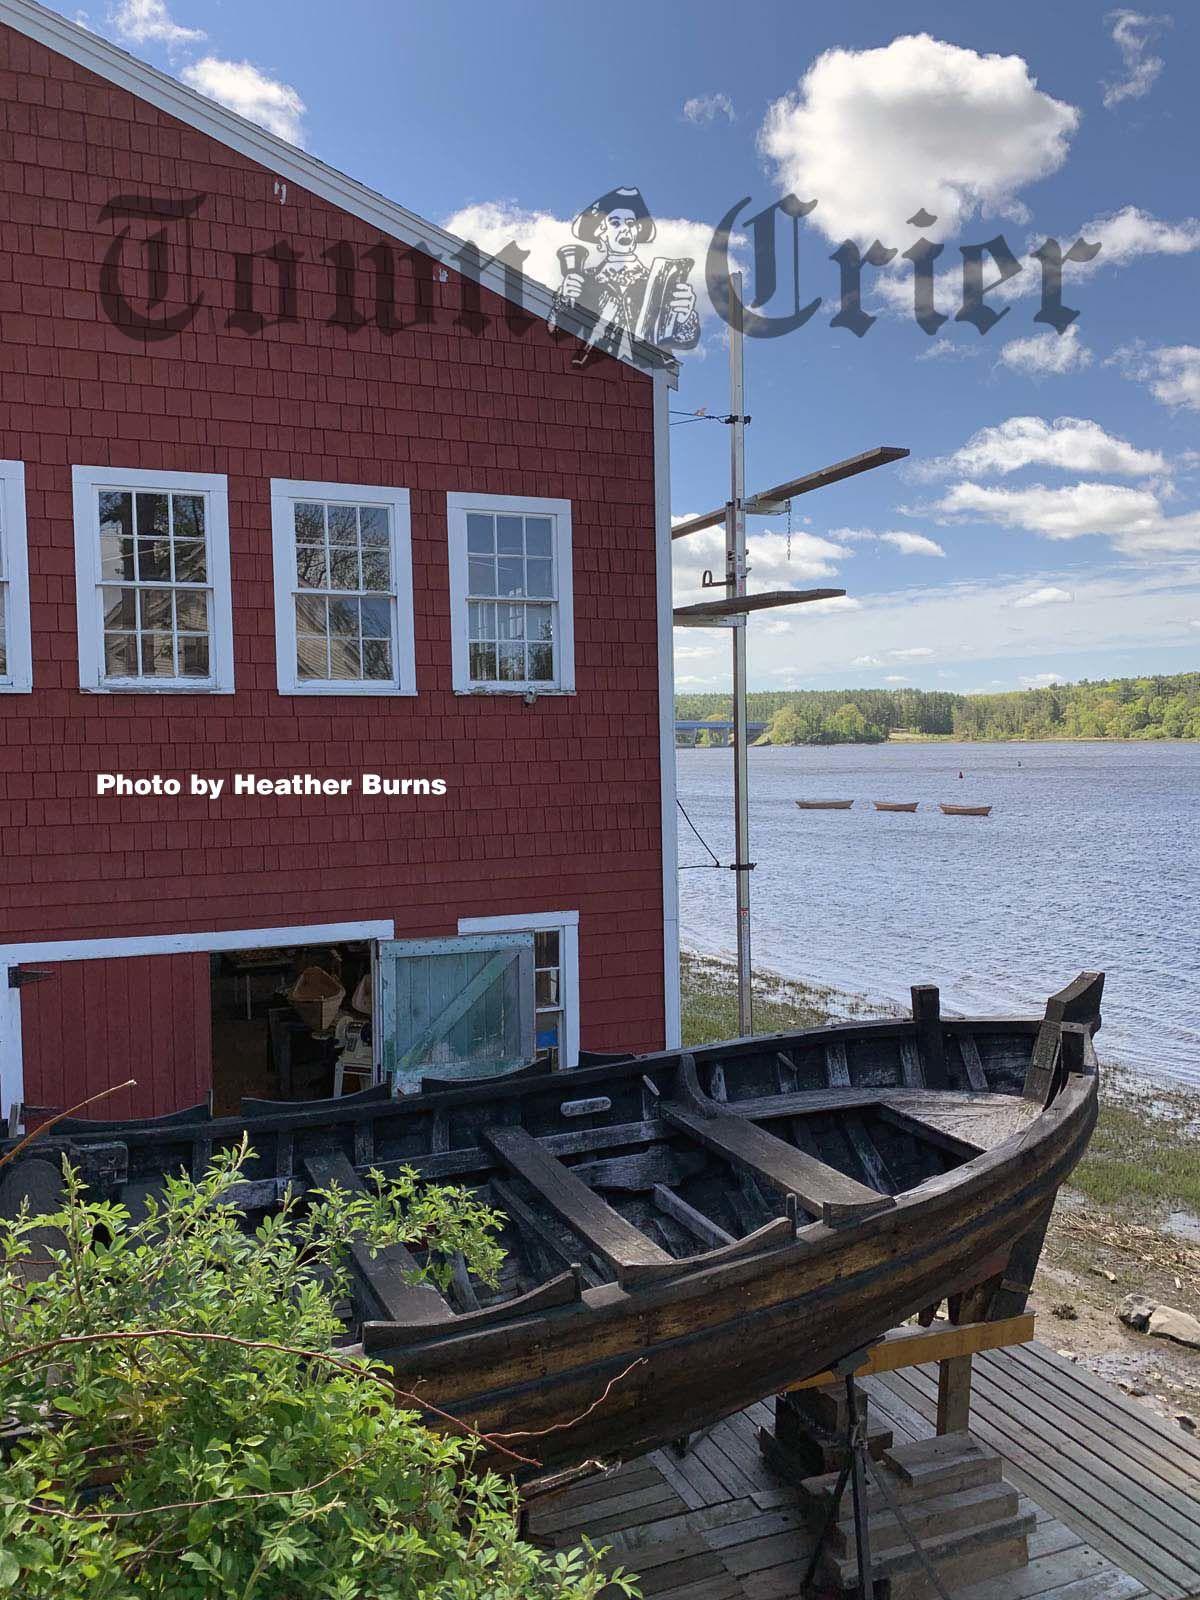 Lowell Boat Shop celebrates 225 years News